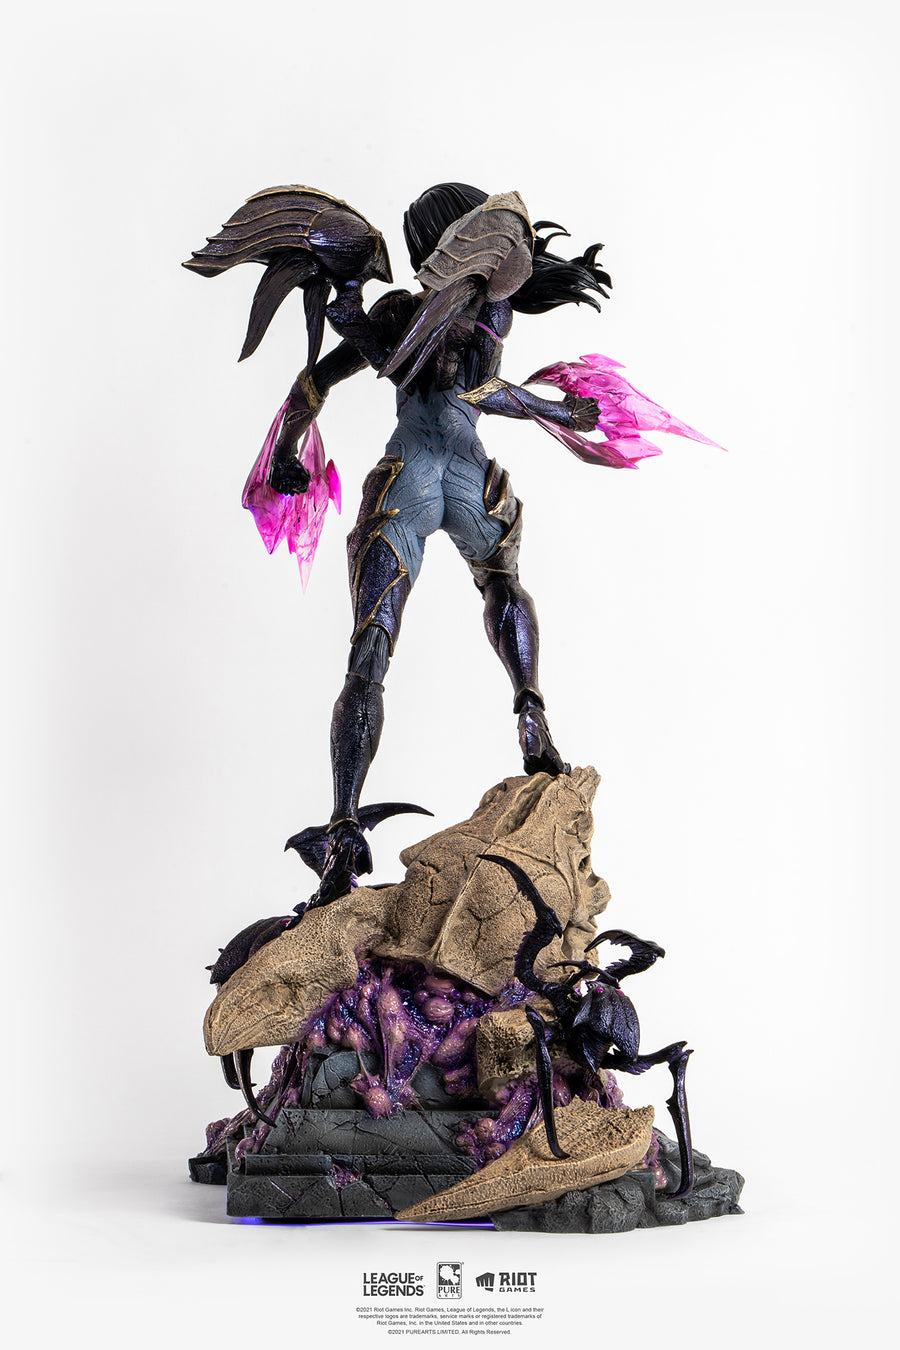 League of Legends Kai'Sa 1/4 Scale Statue by PureArts and Riot Games!